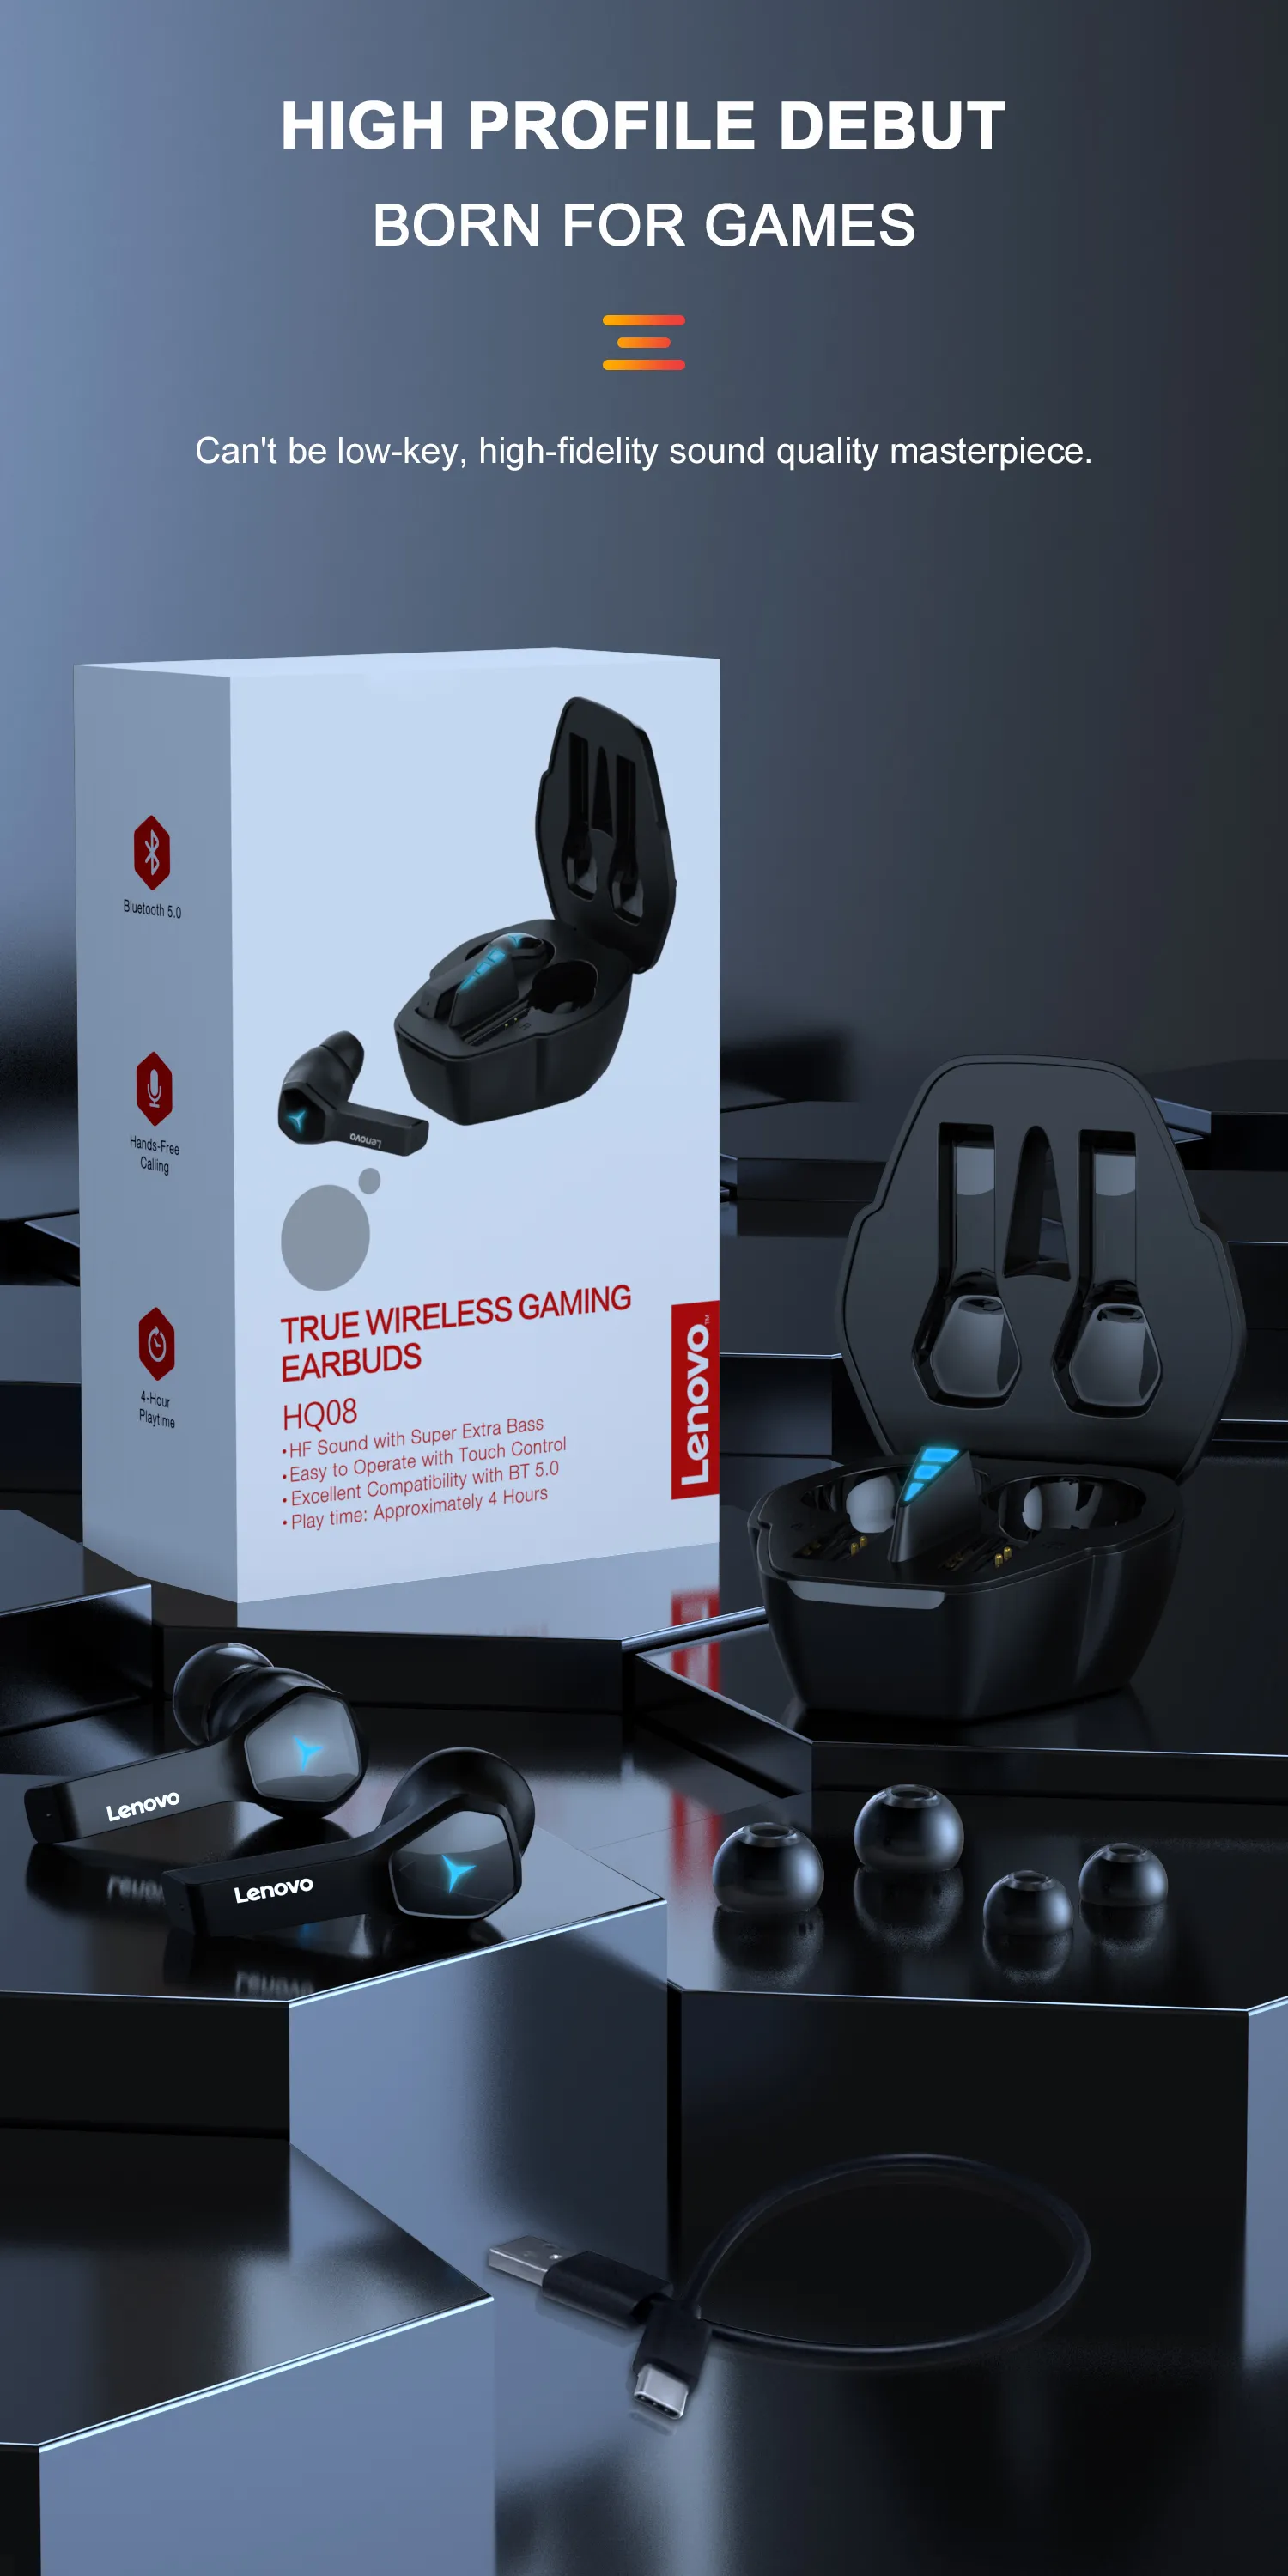 Format,Webp Lenovo &Lt;H1 Class=&Quot;Name&Quot;&Gt;Lenovo Hq08 Gaming Earbuds&Lt;/H1&Gt; Https://Www.youtube.com/Watch?V=Ygdzgaxtoai Bluetooth: 5.0 Sensitivity：98±3Db Speaker Impedance:32Ω Headphone Battery:30Mah Charging Bin Battery:400Mah Play Time:about 4 Hours &Lt;A Href=&Quot;Https://Lablaab.com/?S=Earbuds&Amp;Post_Type=Product&Amp;Product_Cat=0&Quot;&Gt;More Products&Lt;/A&Gt; &Lt;B&Gt;We Also Provide International Wholesale And Retail Shipping To All Gcc Countries: Saudi Arabia, Qatar, Oman, Kuwait, Bahrain. &Lt;/B&Gt; &Lt;Pre&Gt;&Lt;/Pre&Gt; Lenovo Hq08 Gaming Earbuds Lenovo Hq08 Gaming Earbuds